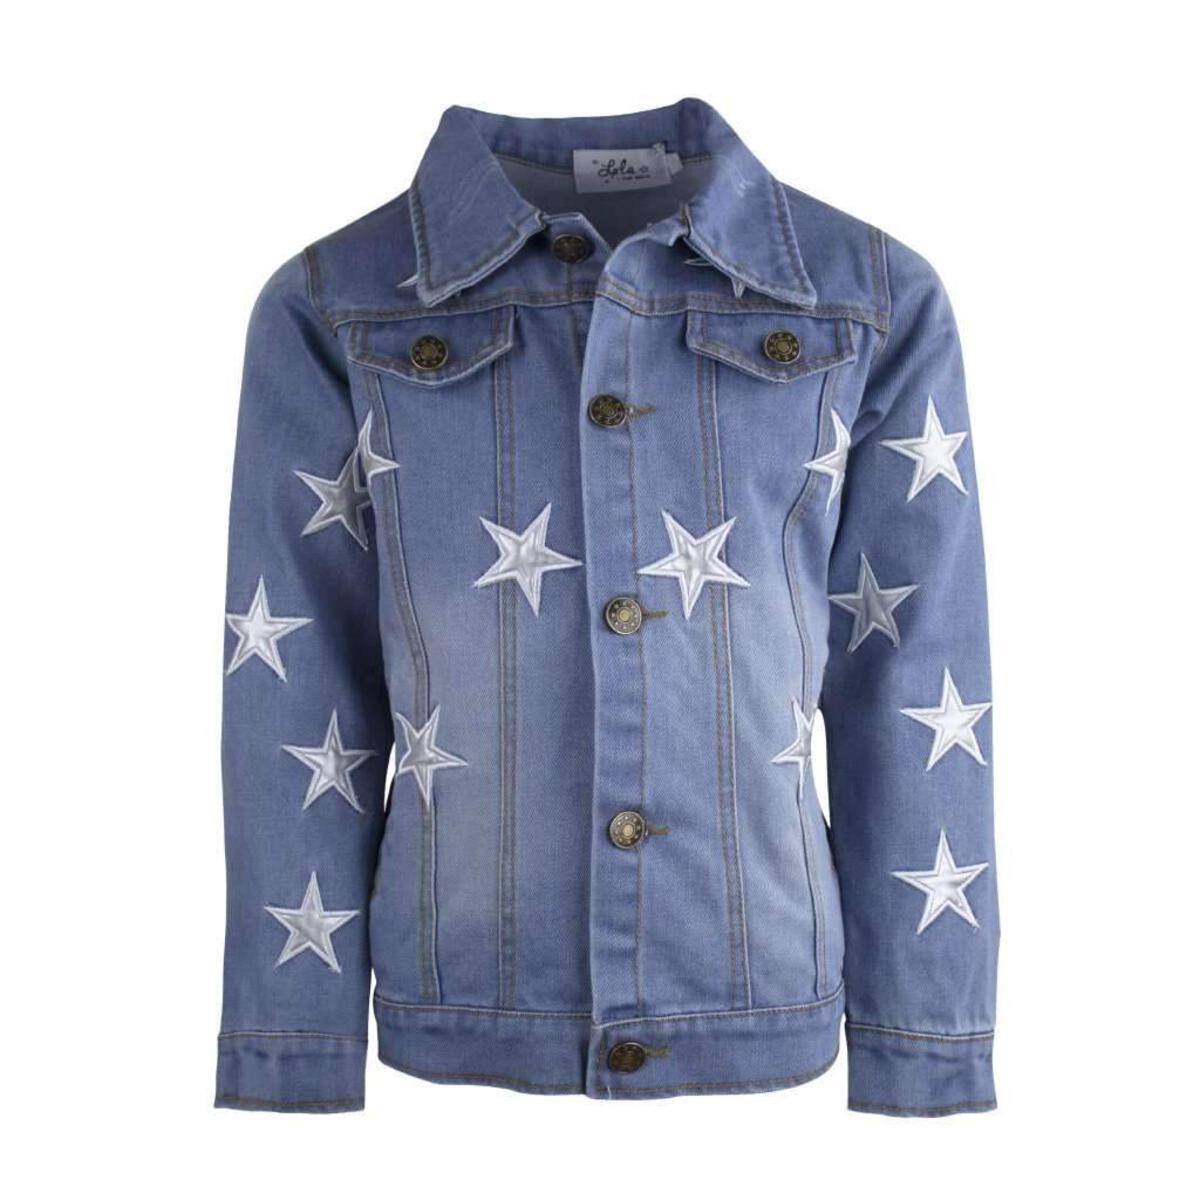 Star Leather Patched Denim Jacket - Magpies Paducah